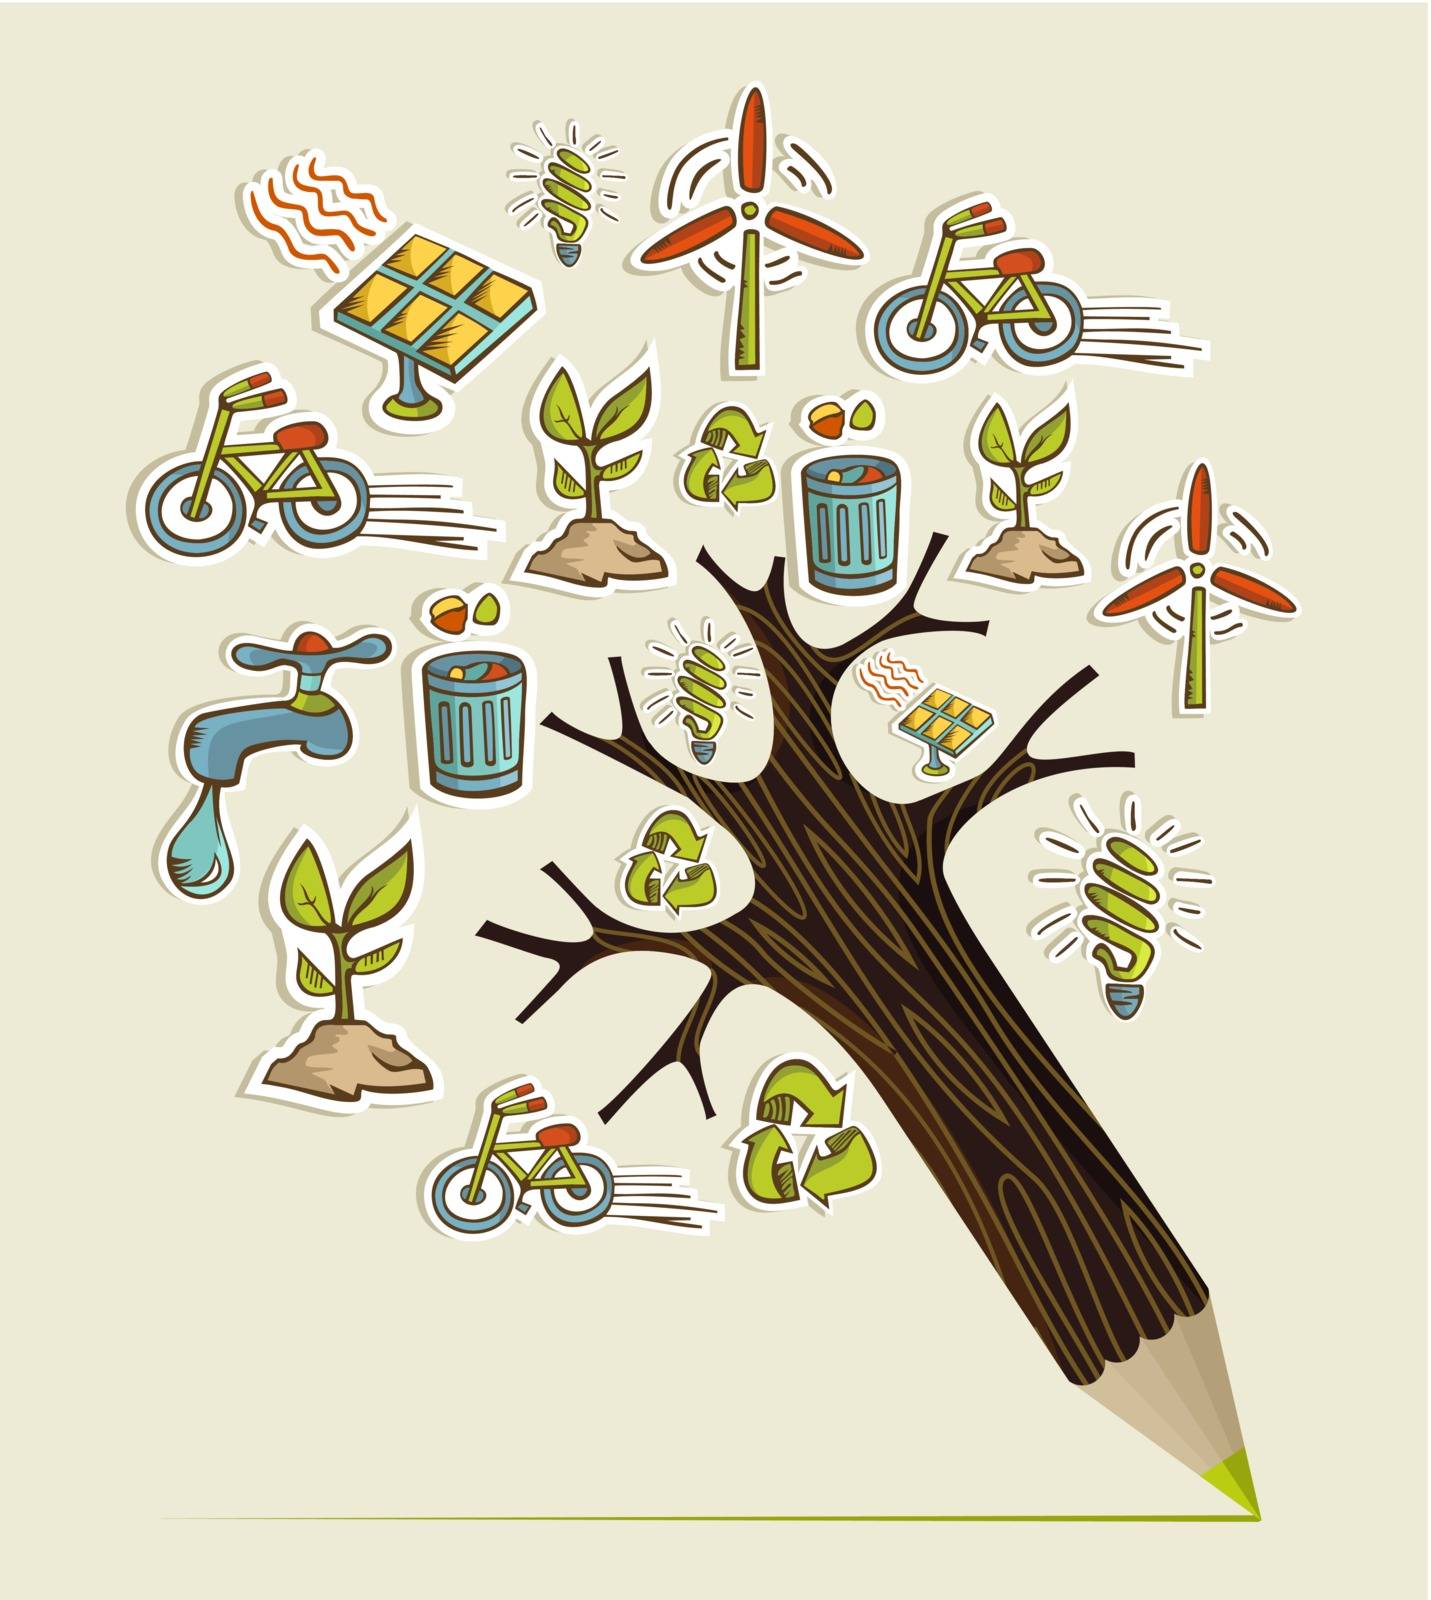 Environmental conservation icons in pencil tree shape. Vector illustration layered for easy manipulation and custom coloring.